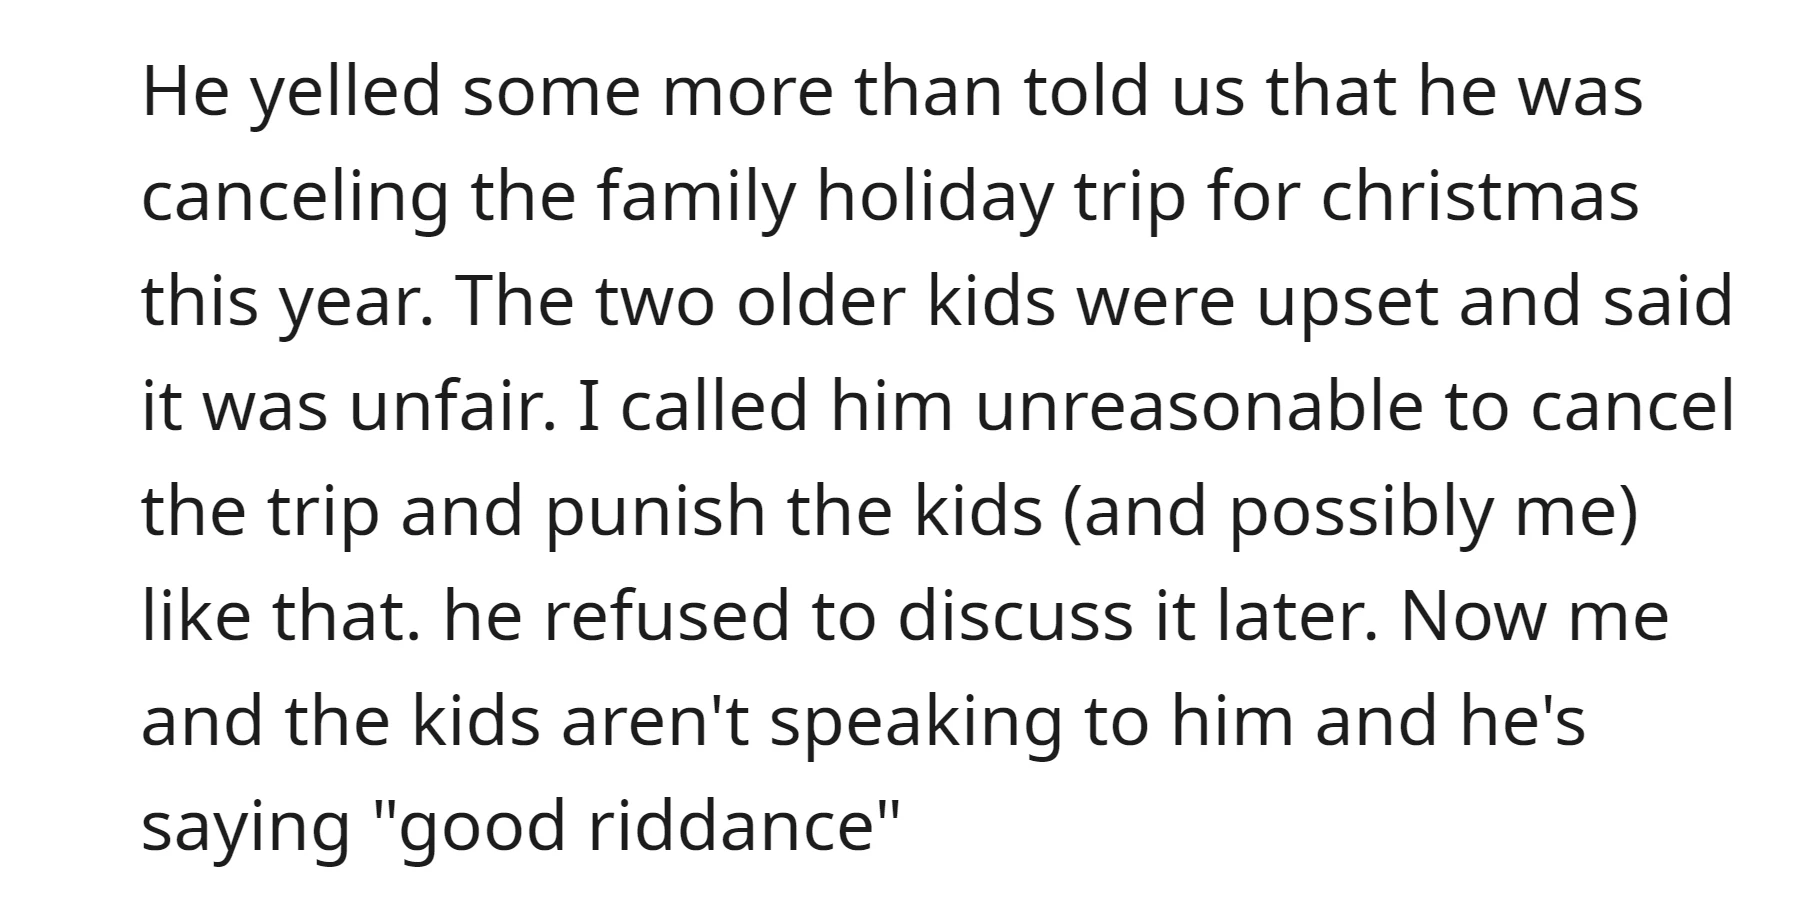 After a heated argument, the husband angrily canceled the family Christmas trip